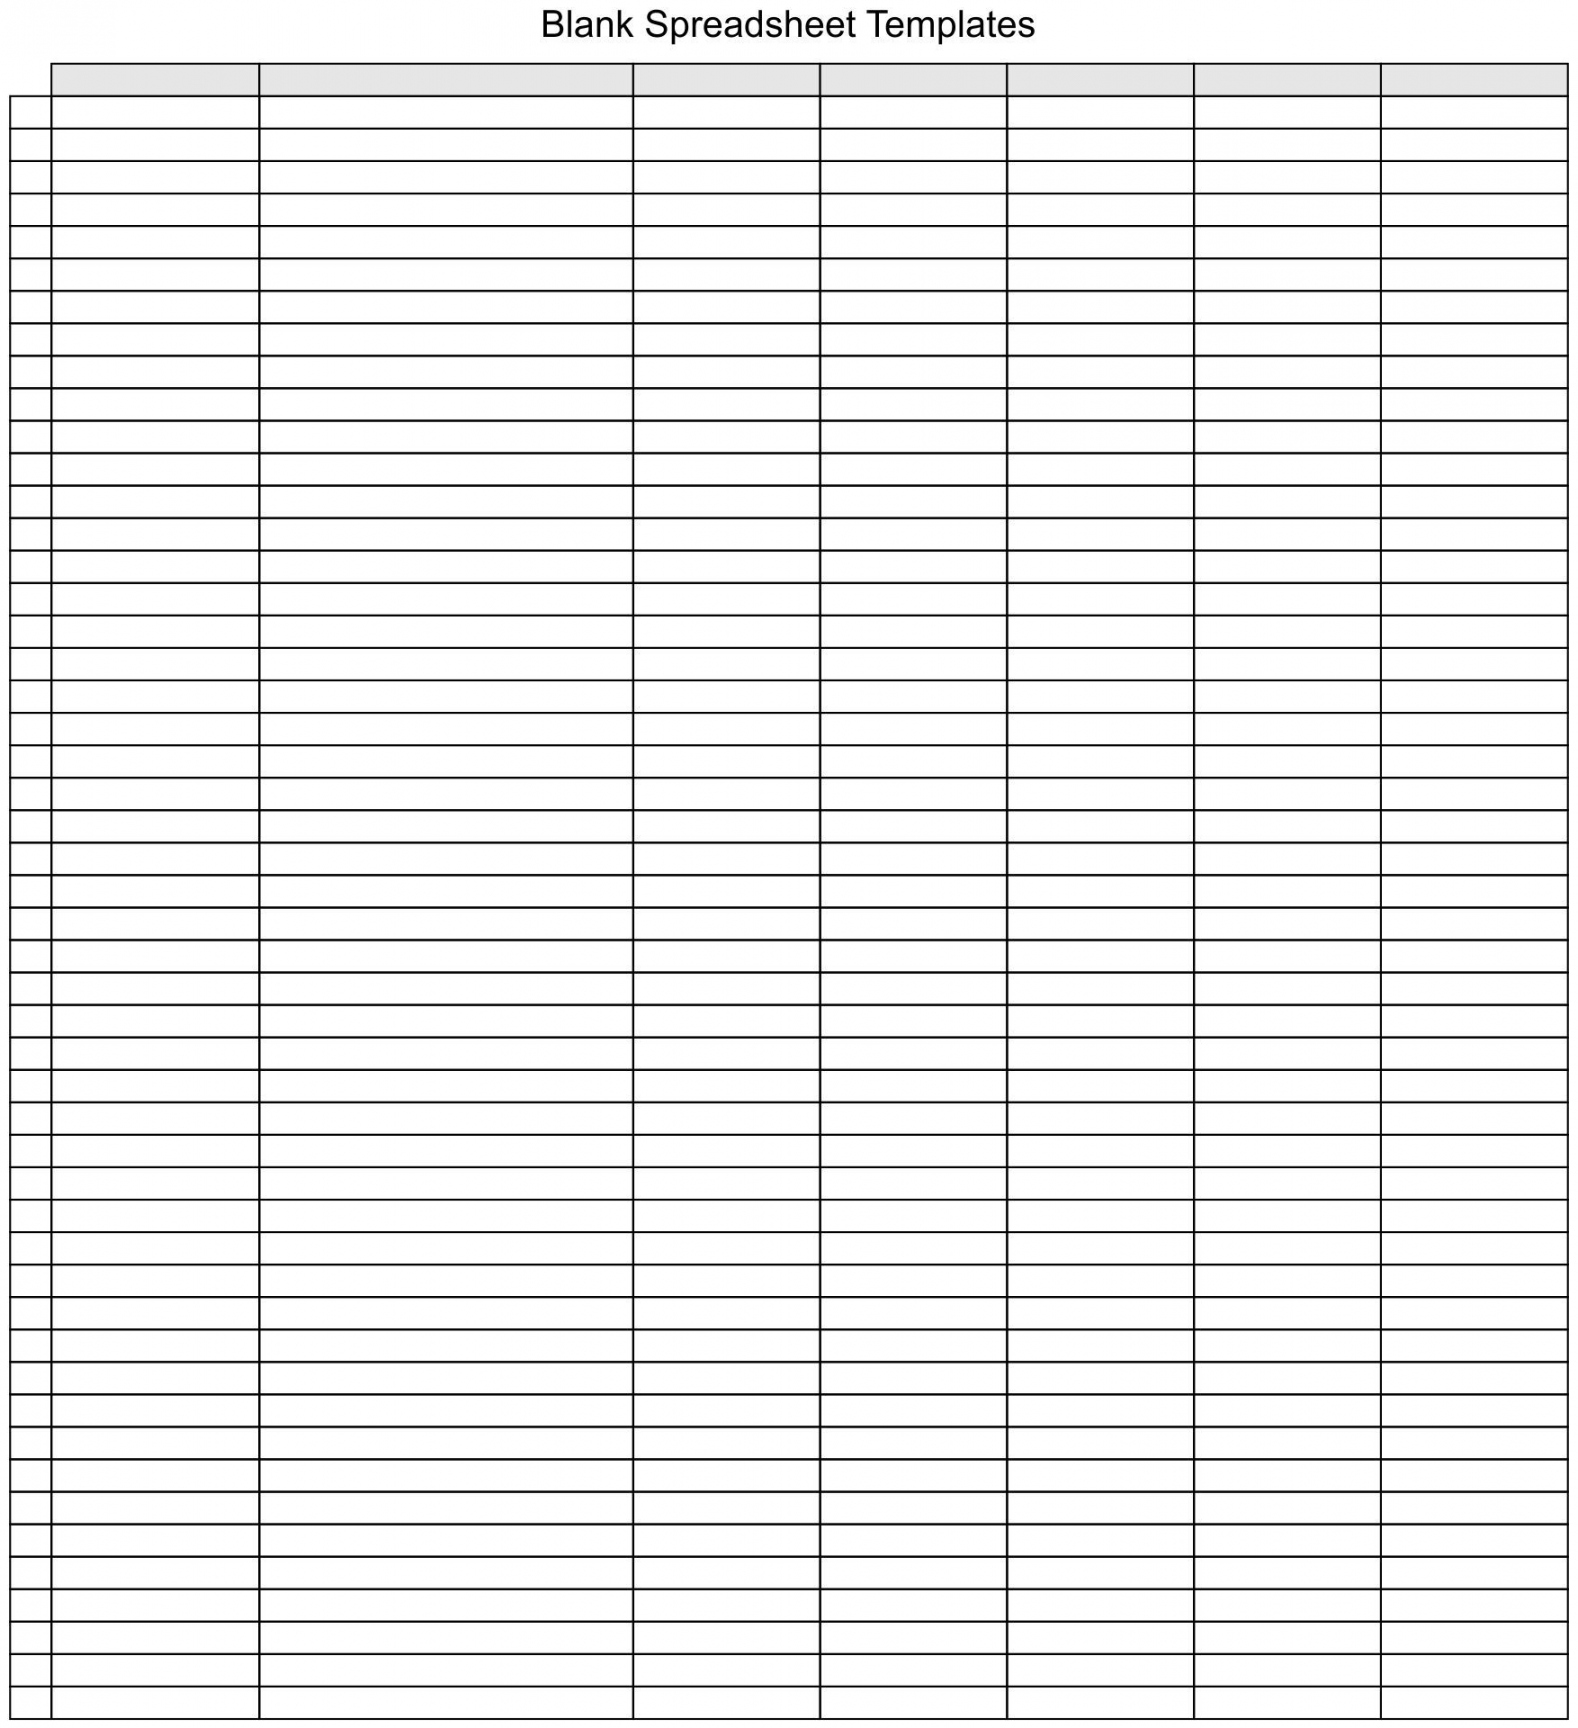 Best Free Printable Spreadsheets Templates - printablee - Blank Spreadsheet Printable